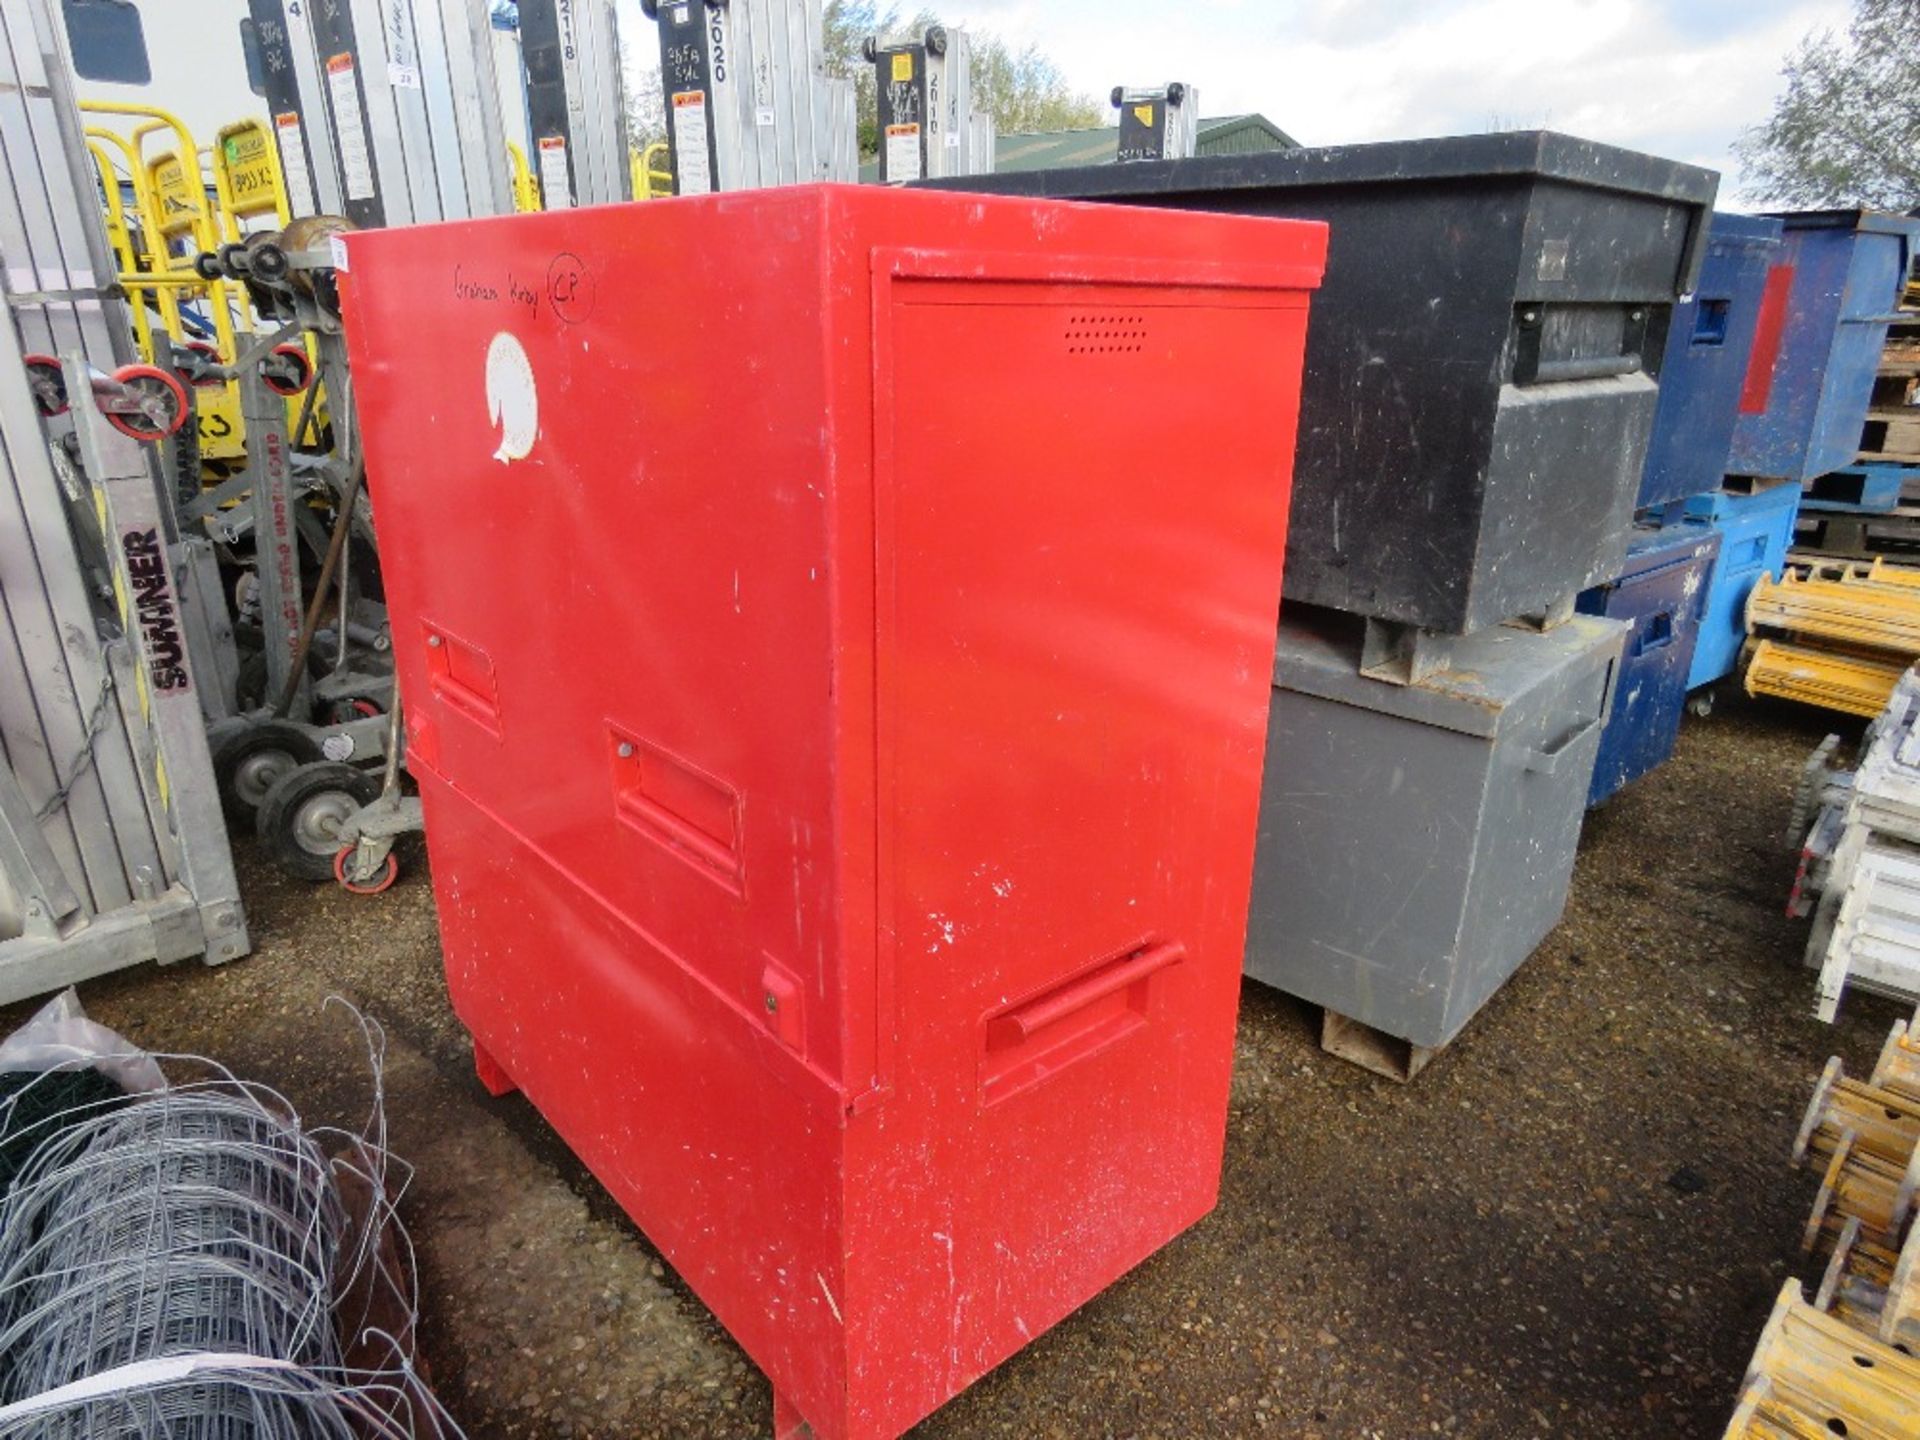 LARGE RED TOOL VAULT, UNLOCKED, NO KEYS. SOURCED FROM COMPANY LIQUIDATION. - Image 2 of 2